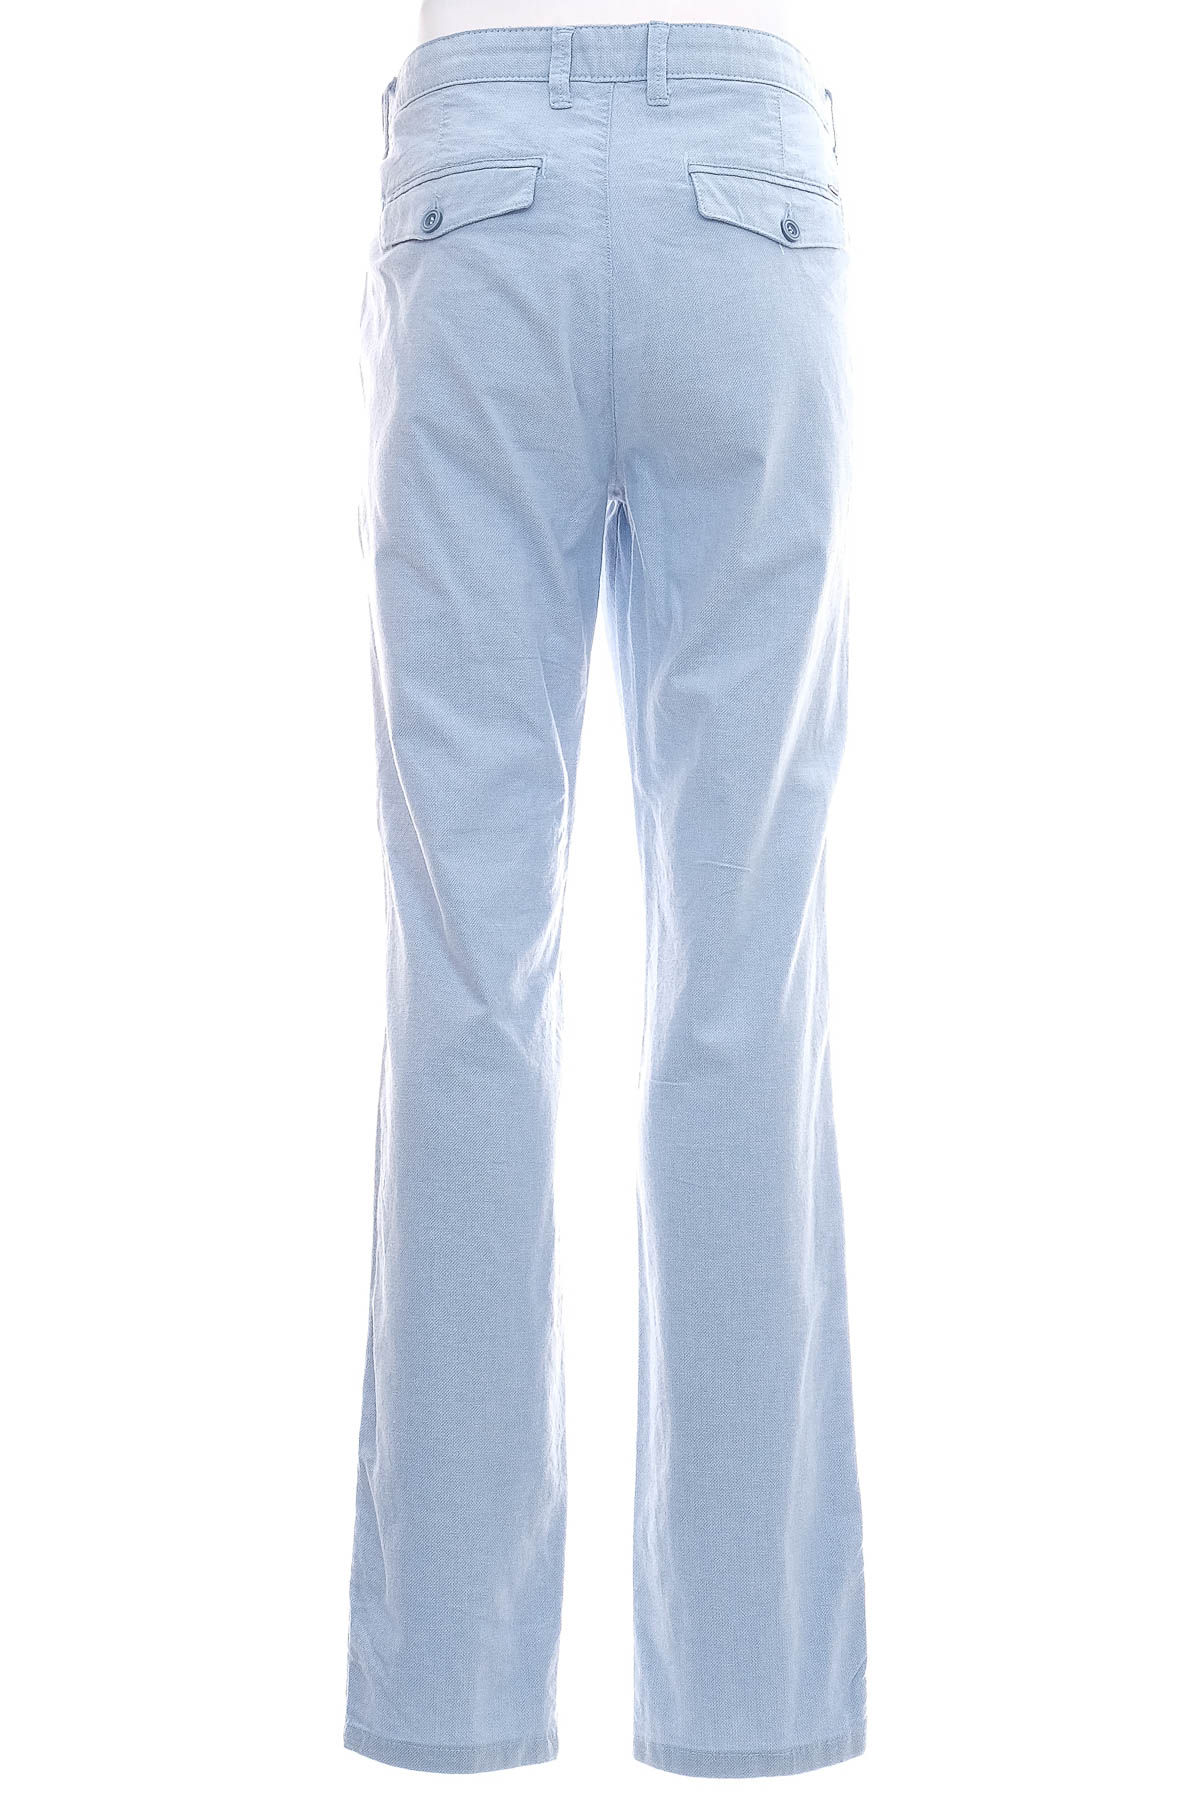 Men's trousers - LCW VISION - 1